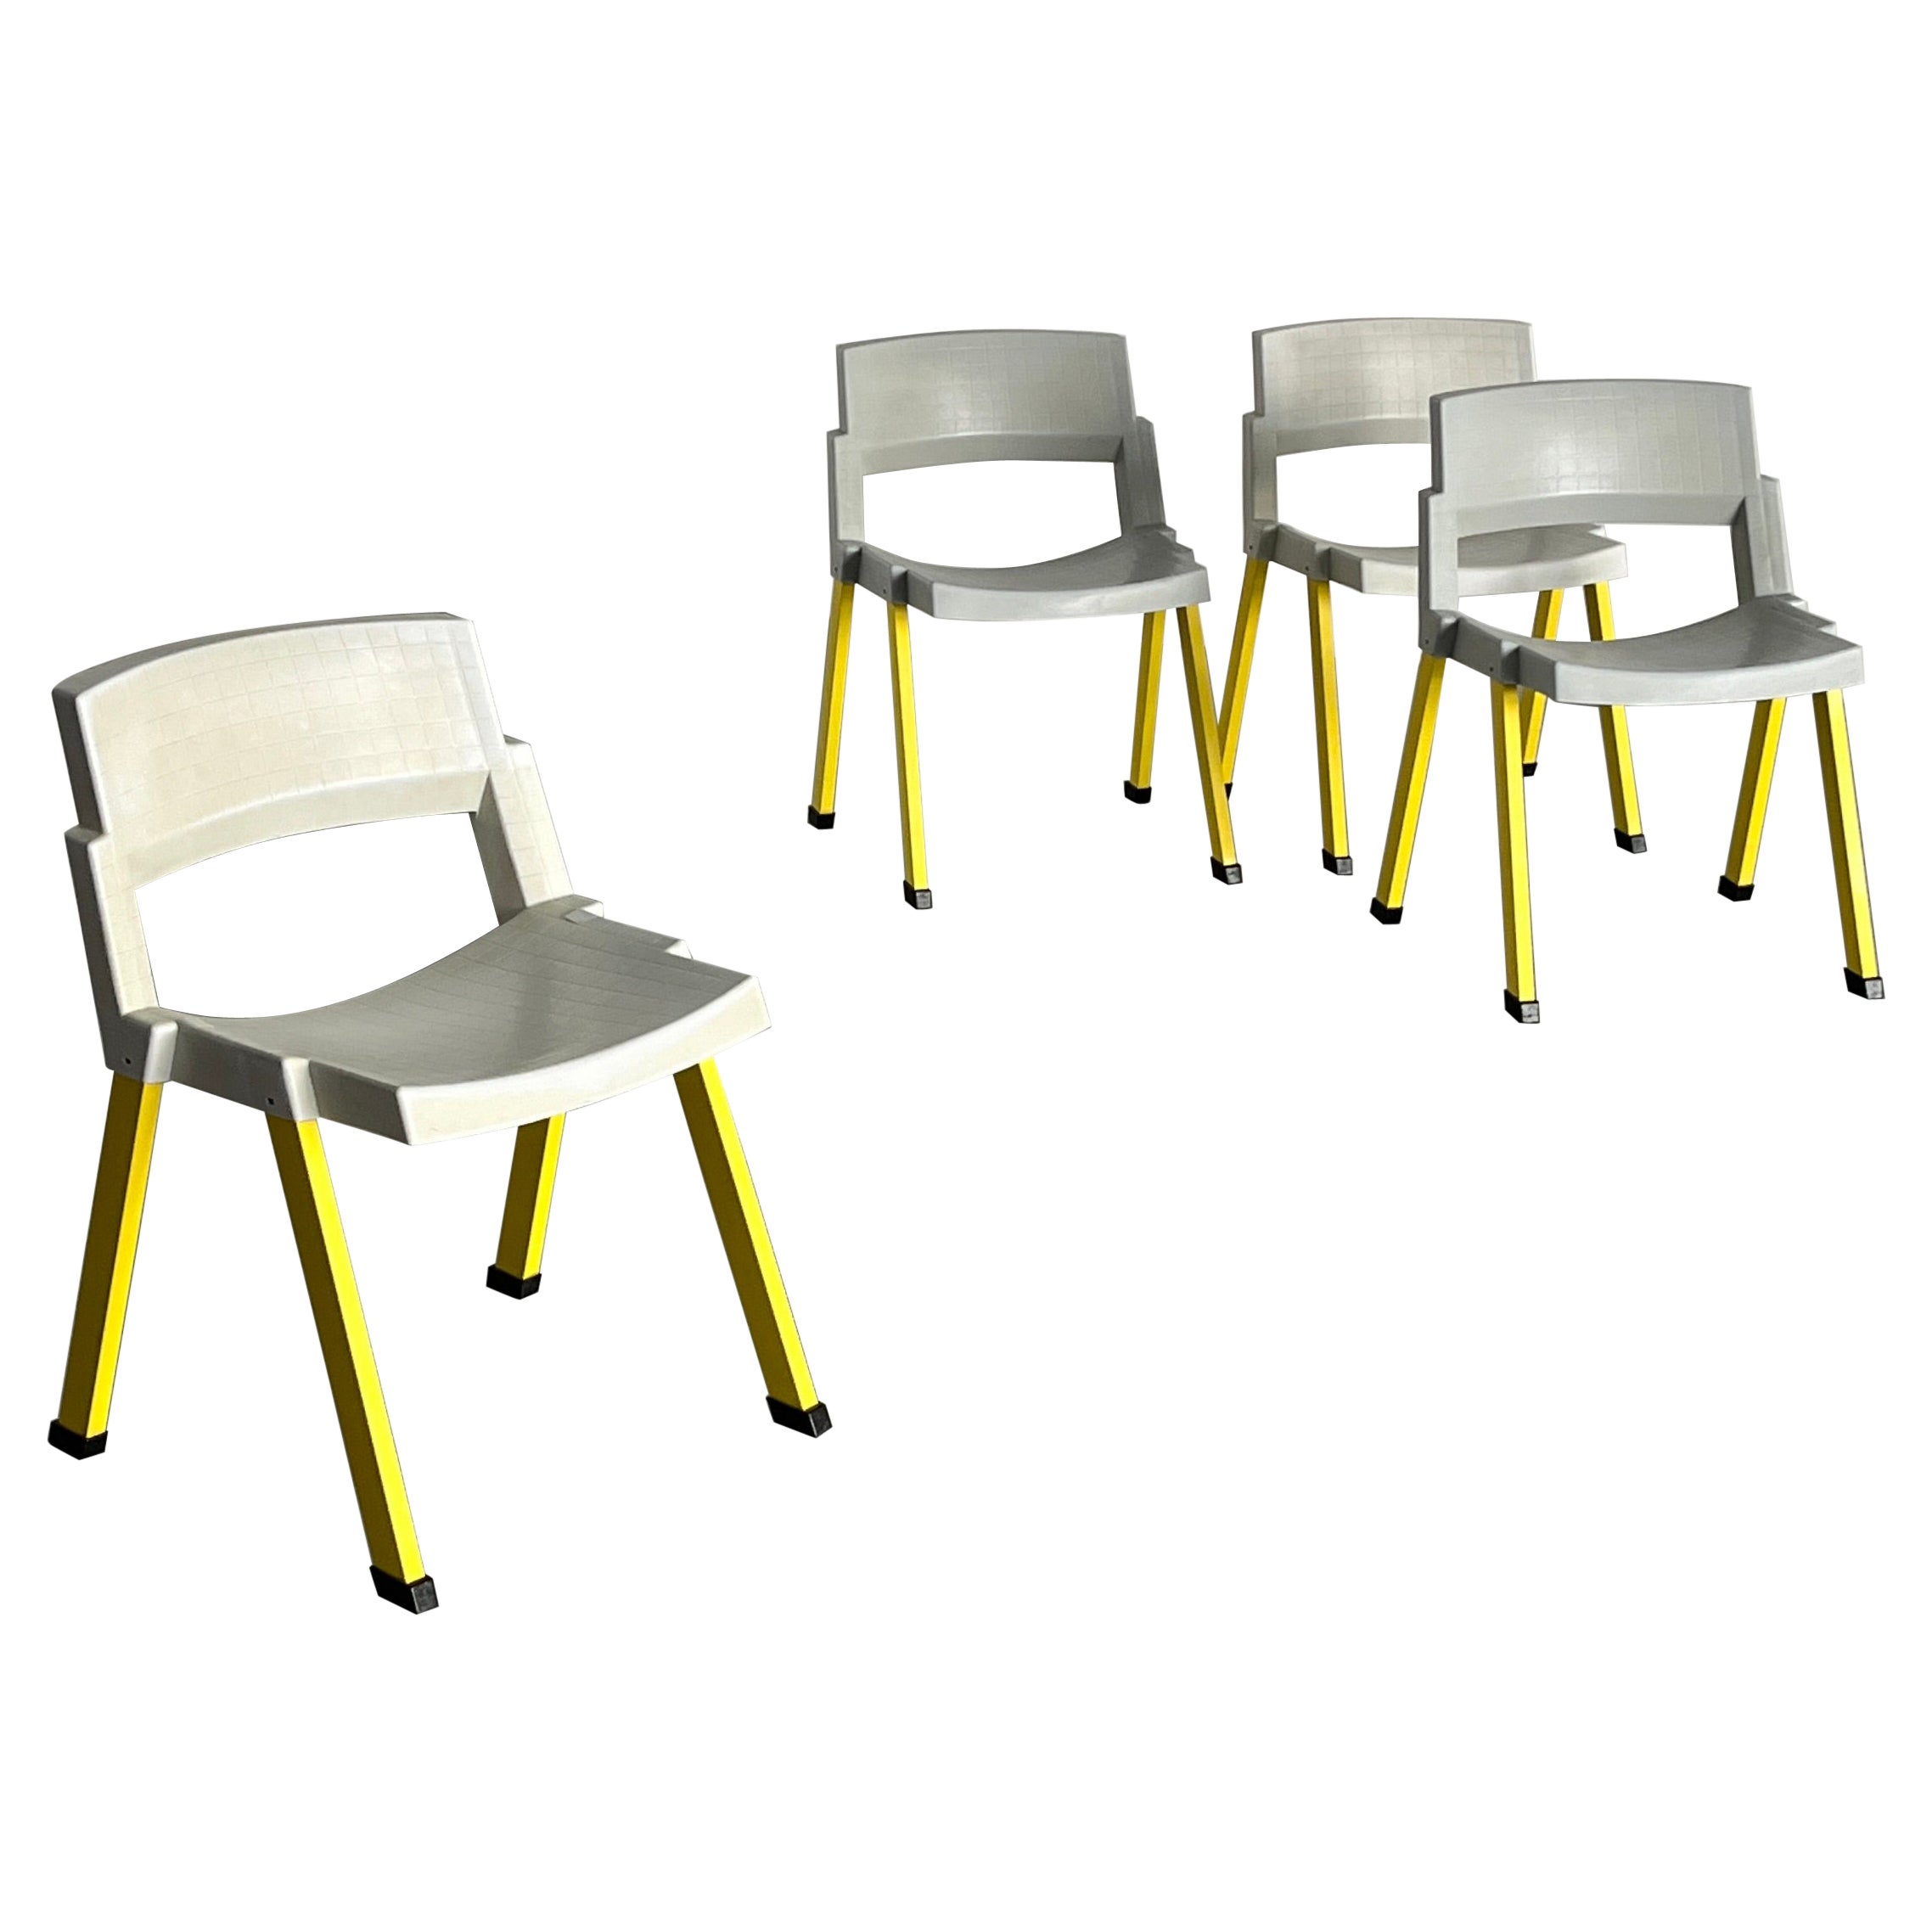 Set of 4 Postmodern 'City' Chairs by Paolo Orlandini and Roberto Lucci for Lamm For Sale